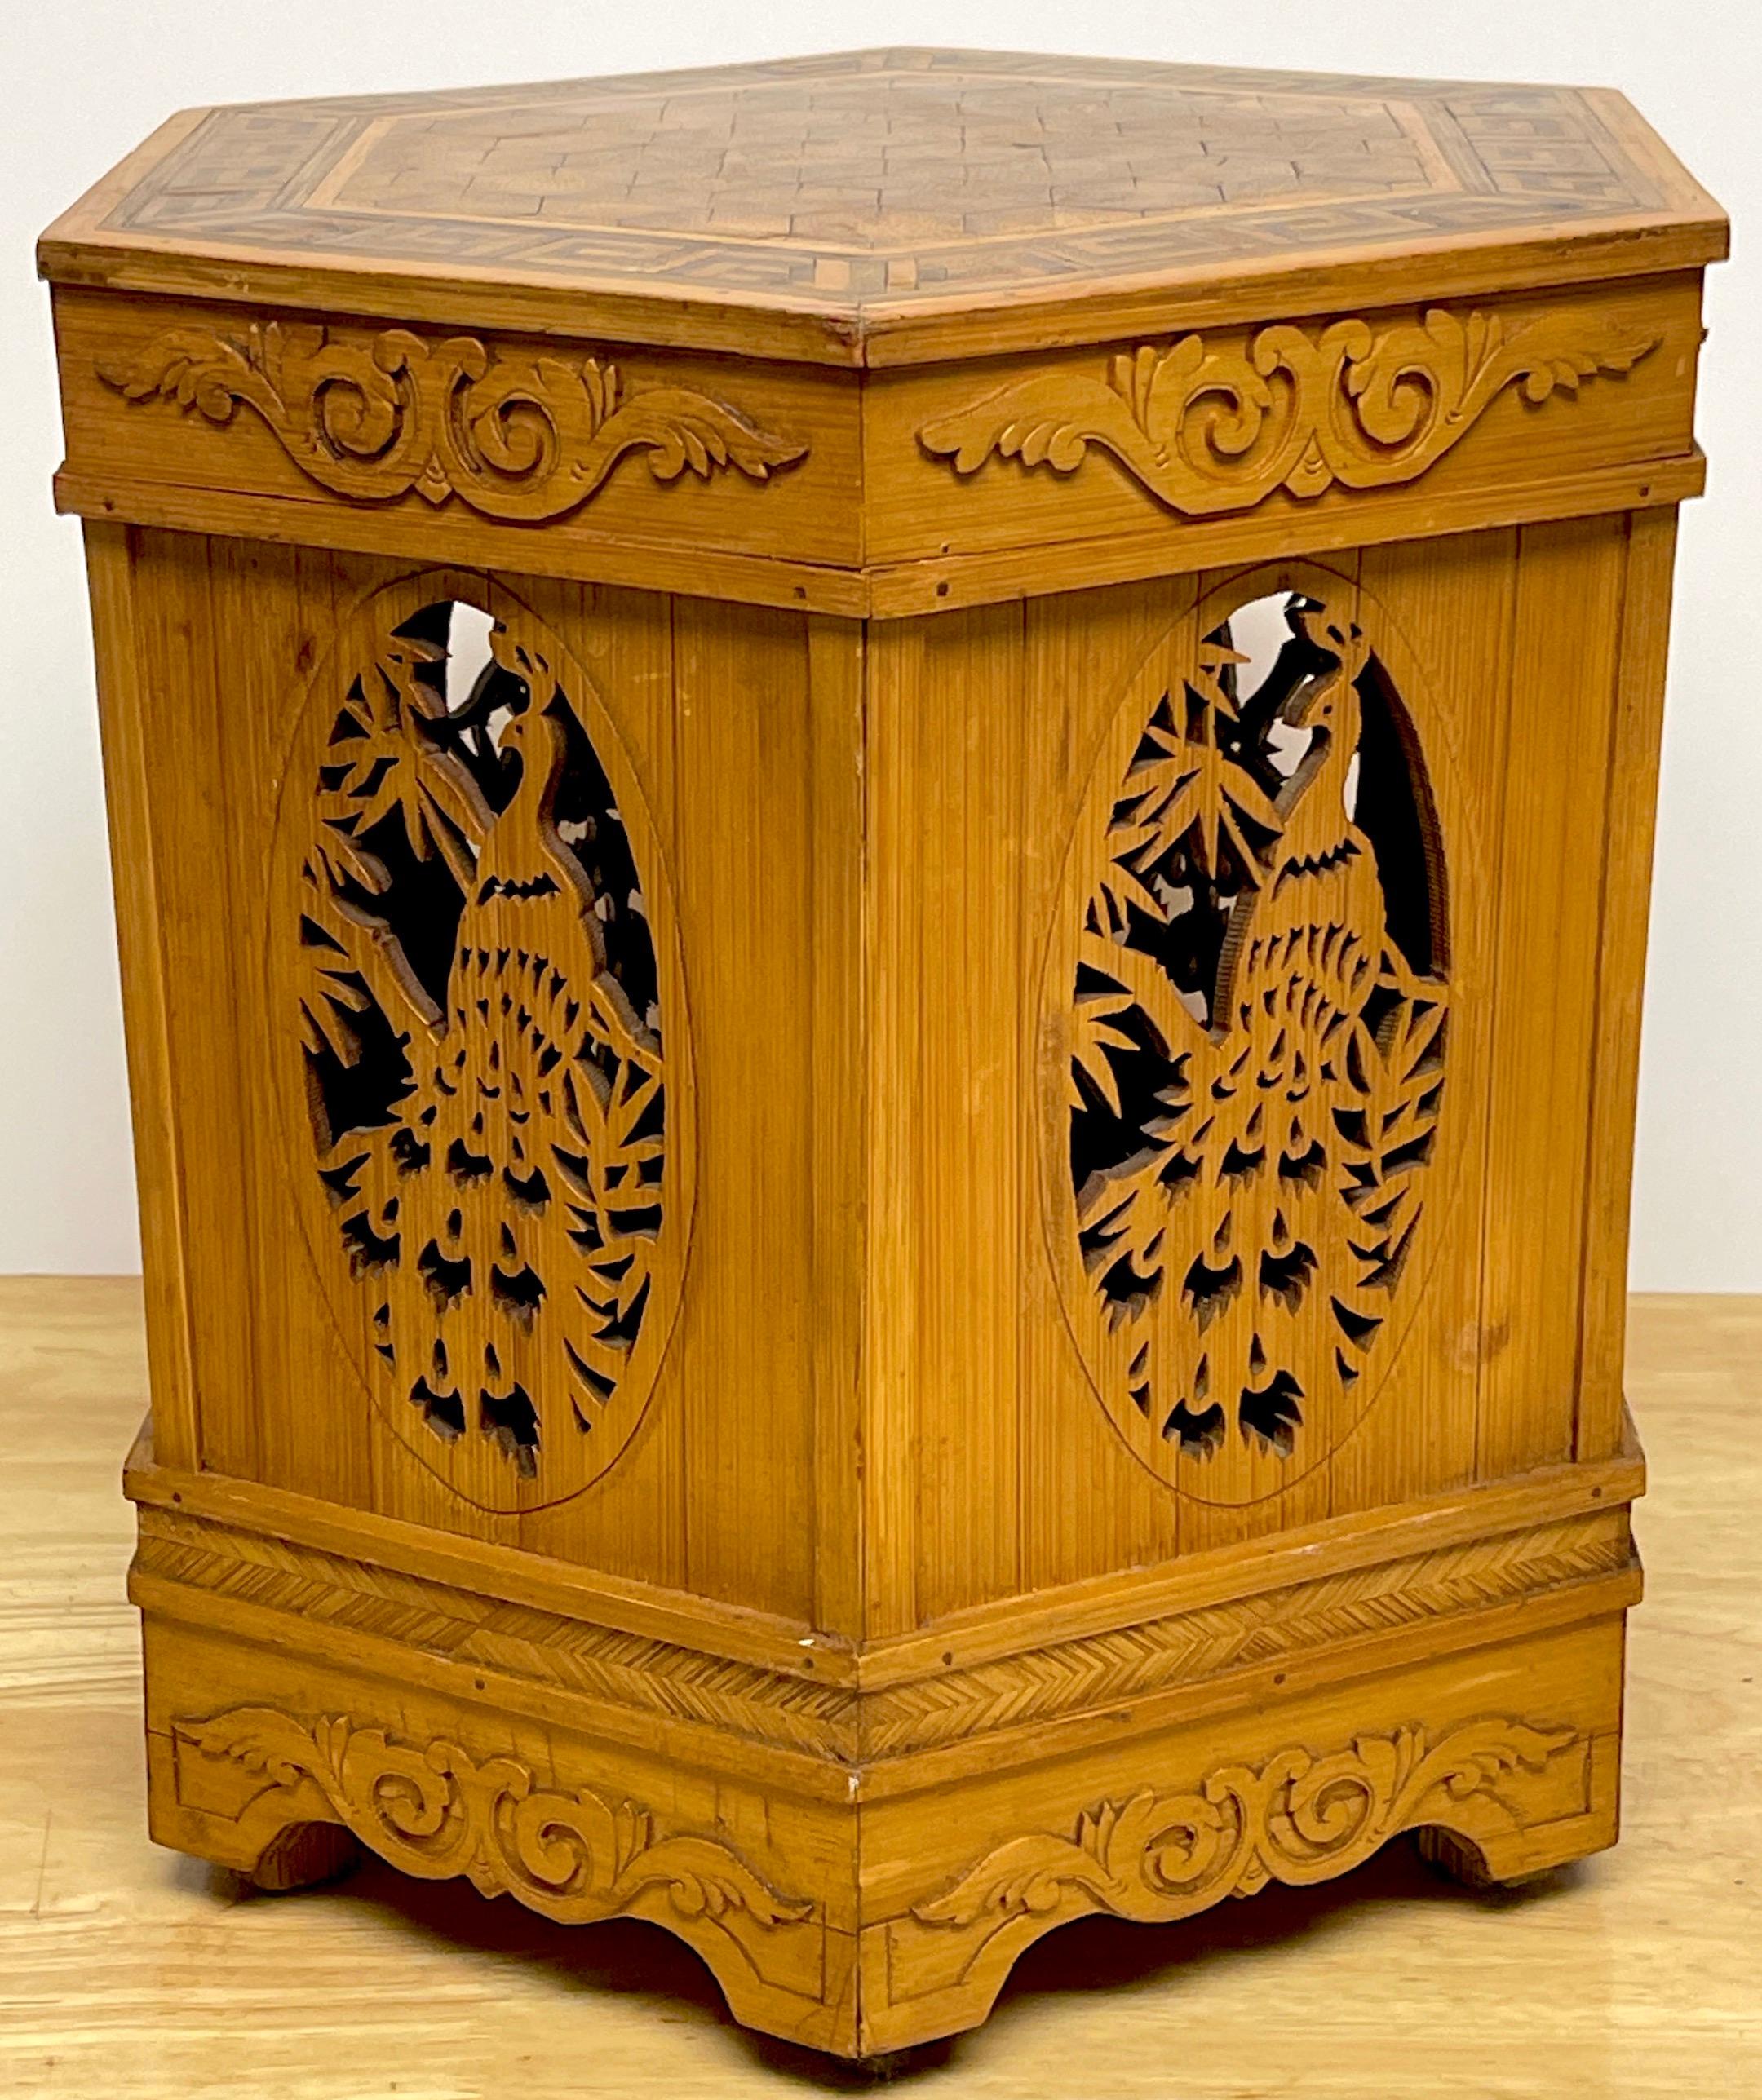 Diminutive American Aesthetic Movement peacock Motif pedestal of side table
of hexagonal form with a stylized Greek key border, with penwork decorated cube-work center. Supported on a conforming base with a 6-inch high x inch wide carved/pierced